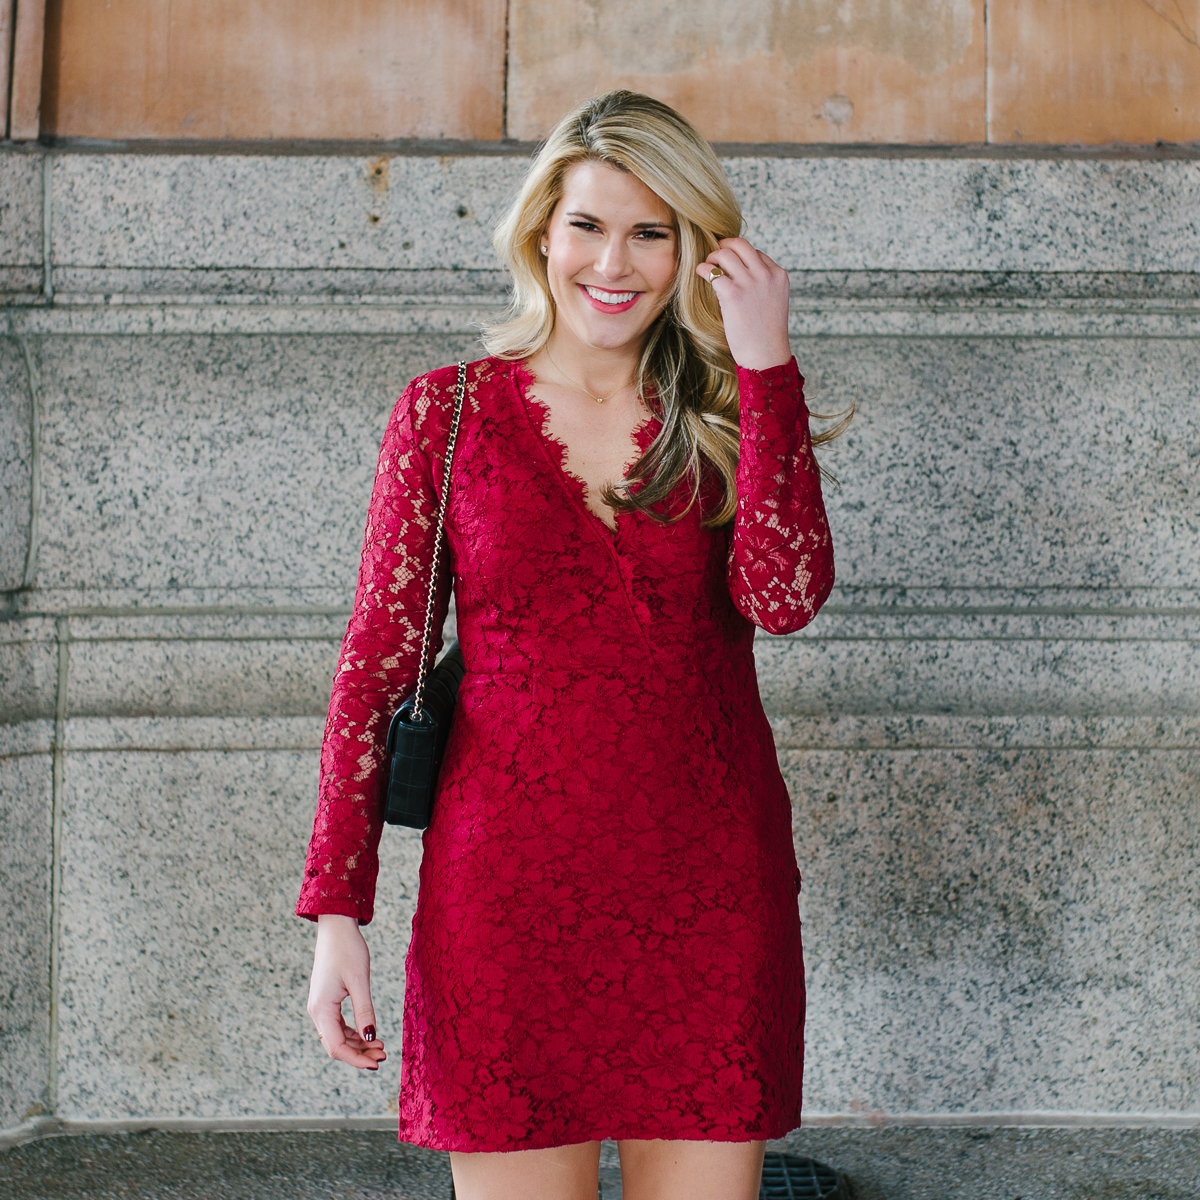 Summer Wind: Red Lace Dress for the Holidays